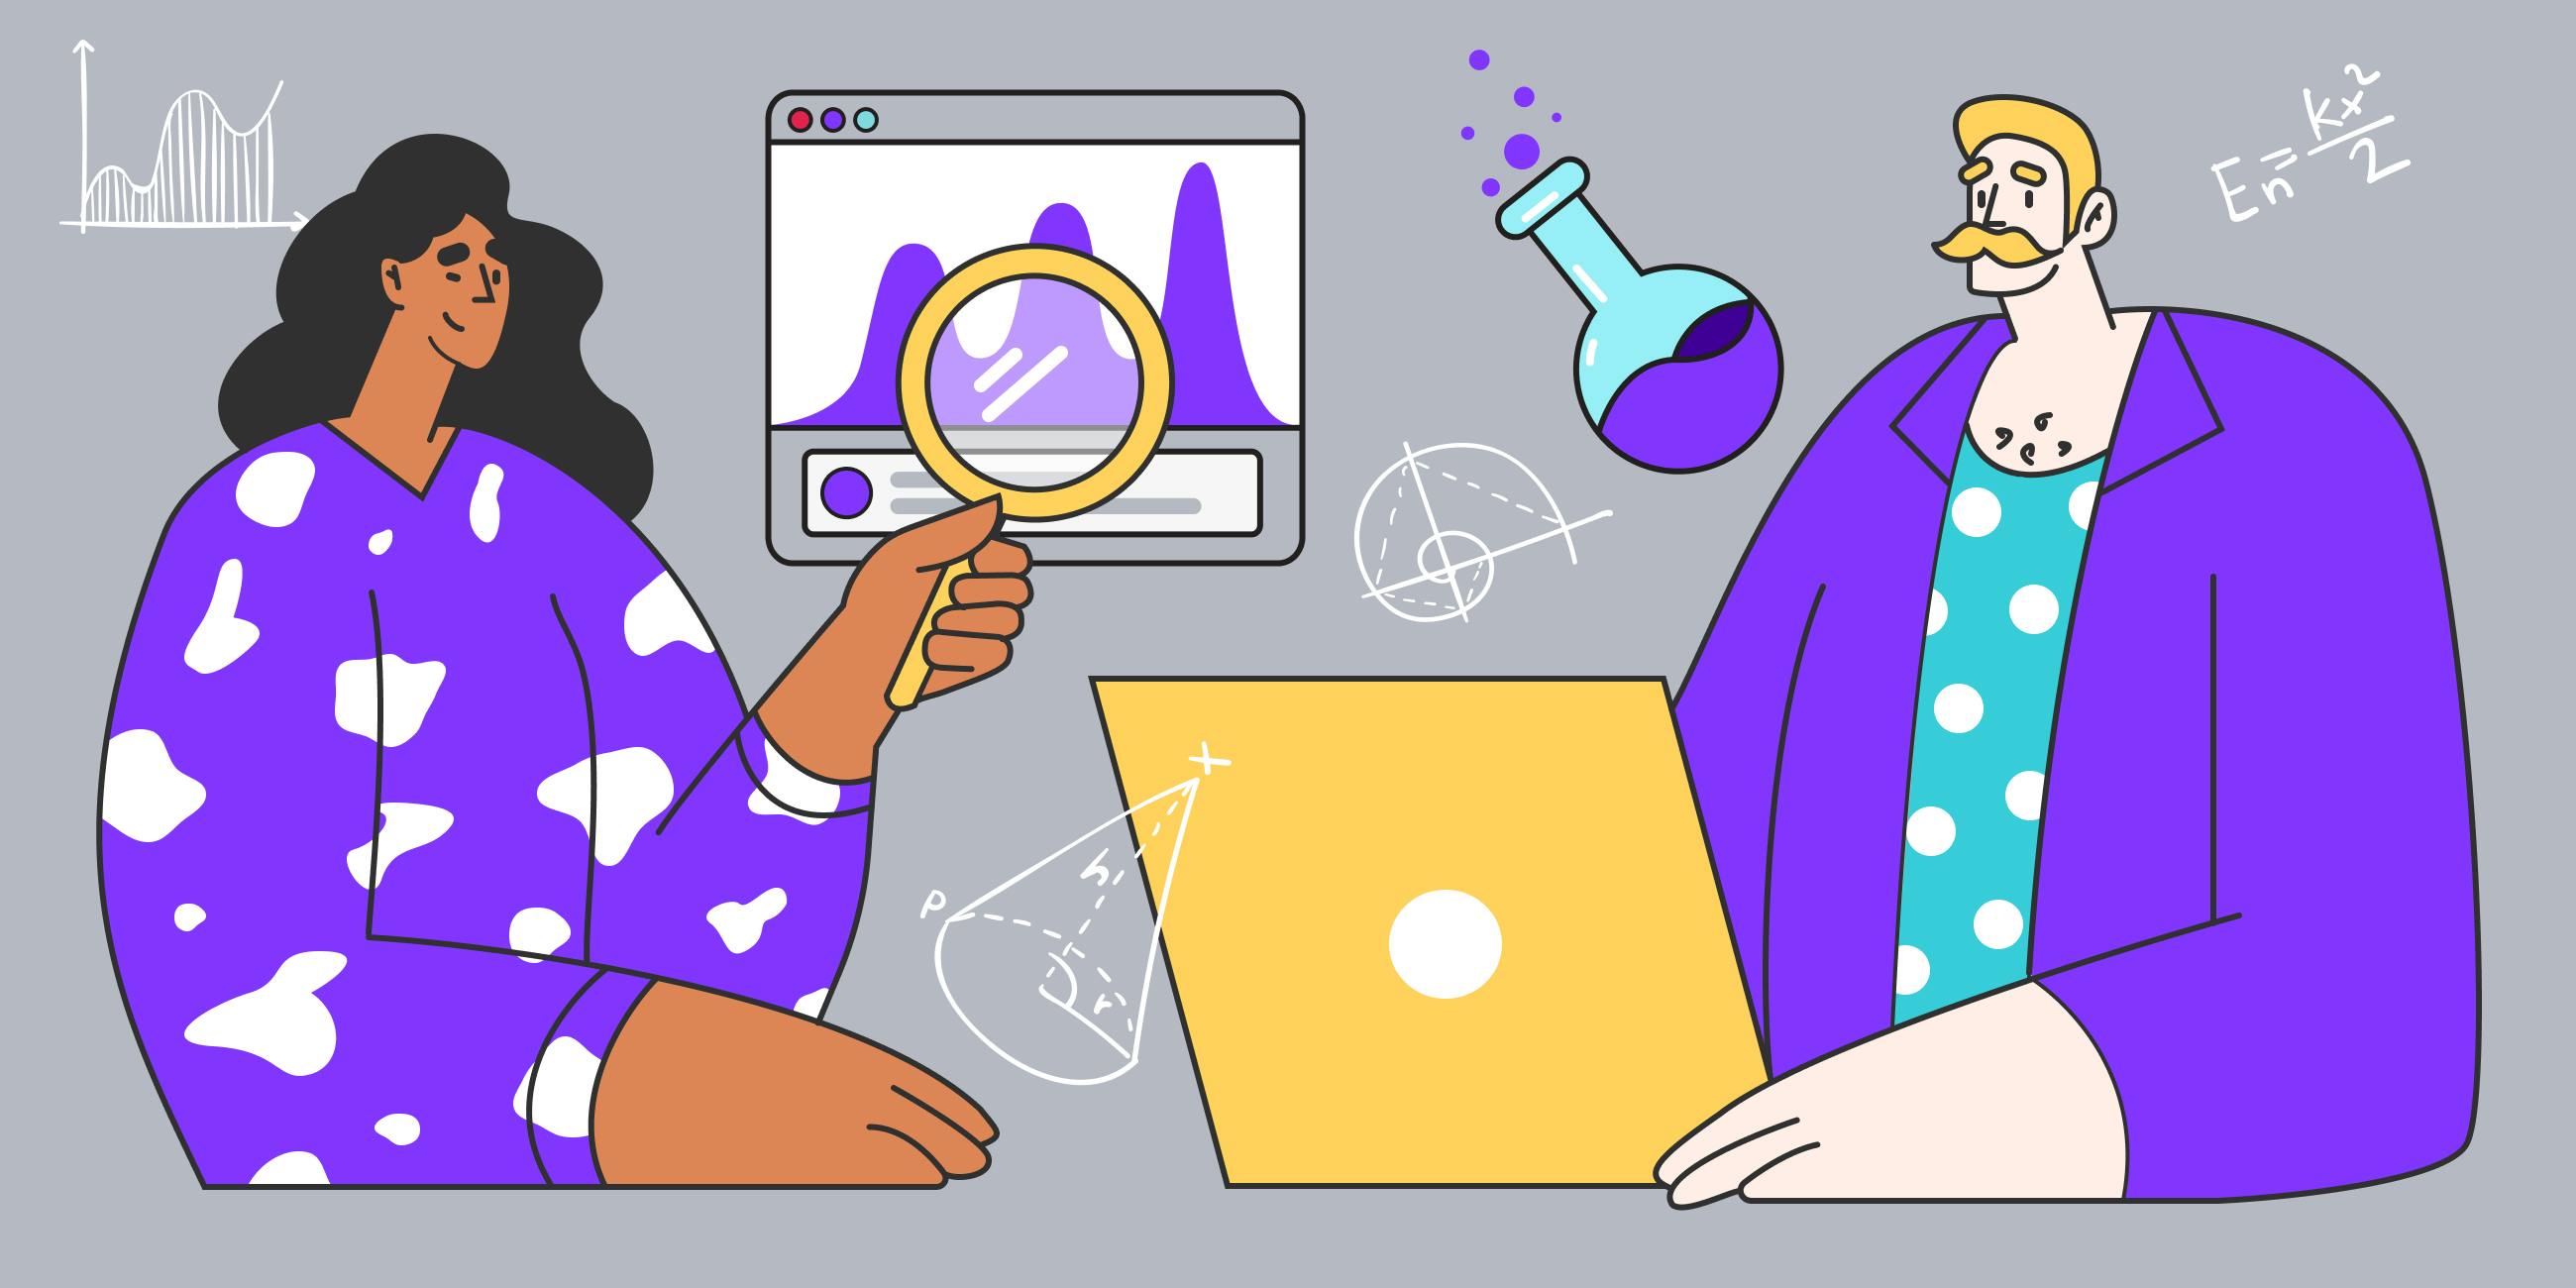 Image of two illustrated people working in data